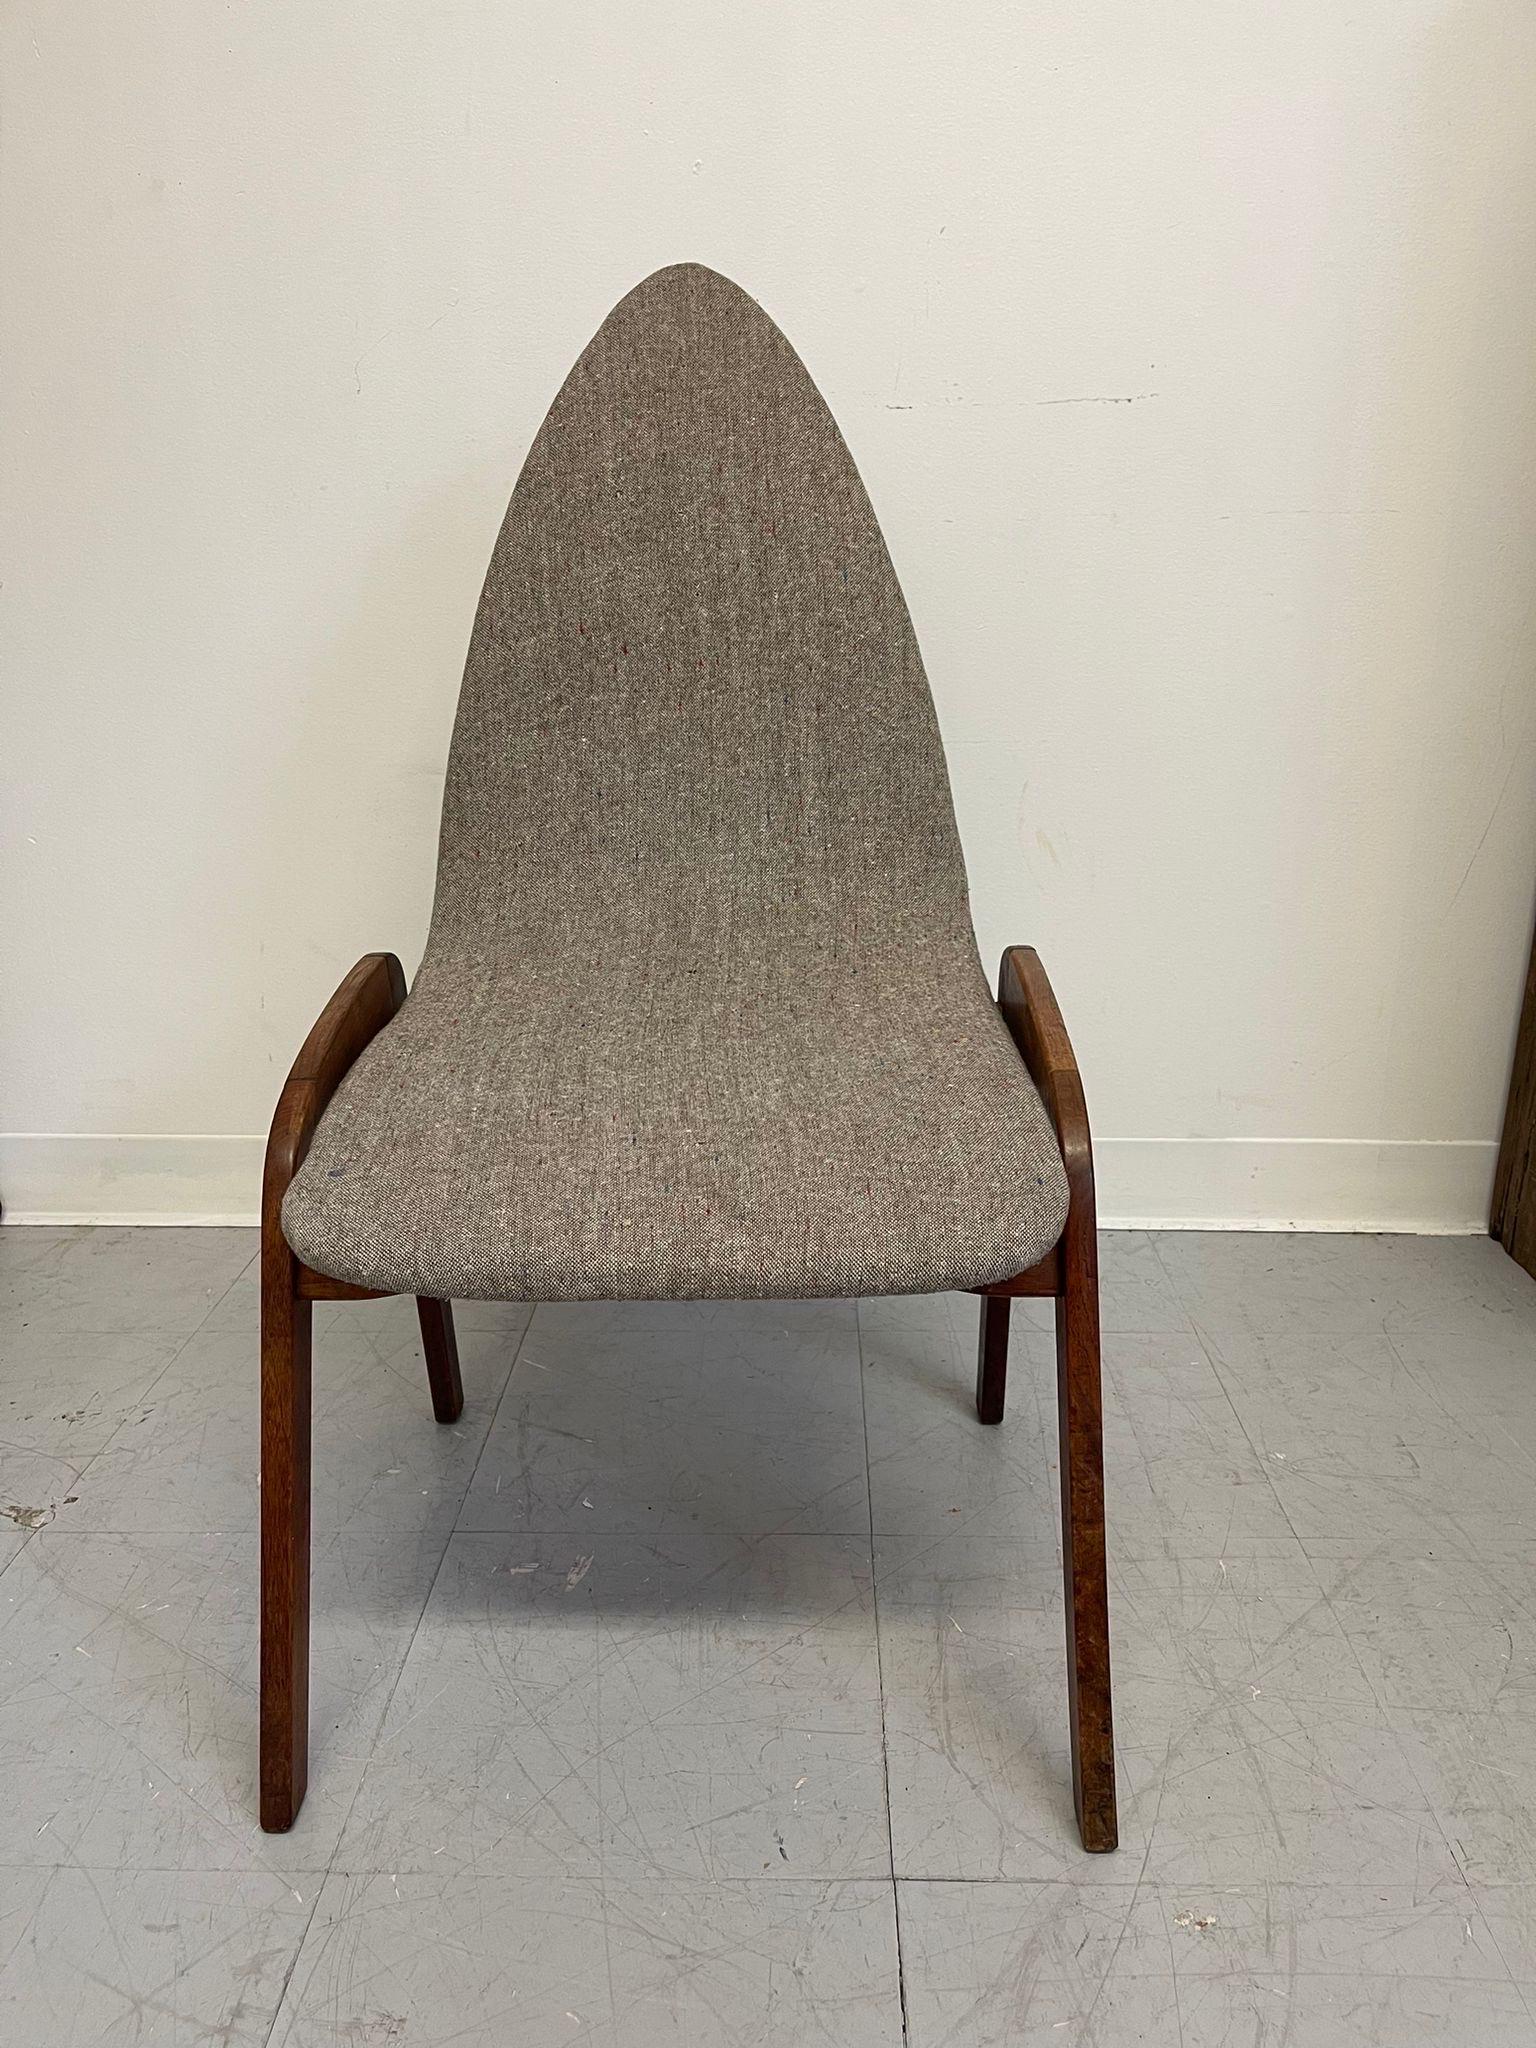 In the Style of Chet Beardsley ,these Chairs Features a unique Cone Shaped Top. Possibly Circa 1960. The Curve of the Leg is also Unique, Setting this Chair Apart from Others

Dimensions. 21 W ; 18.5 D ; 35 H
Seat Height. 16